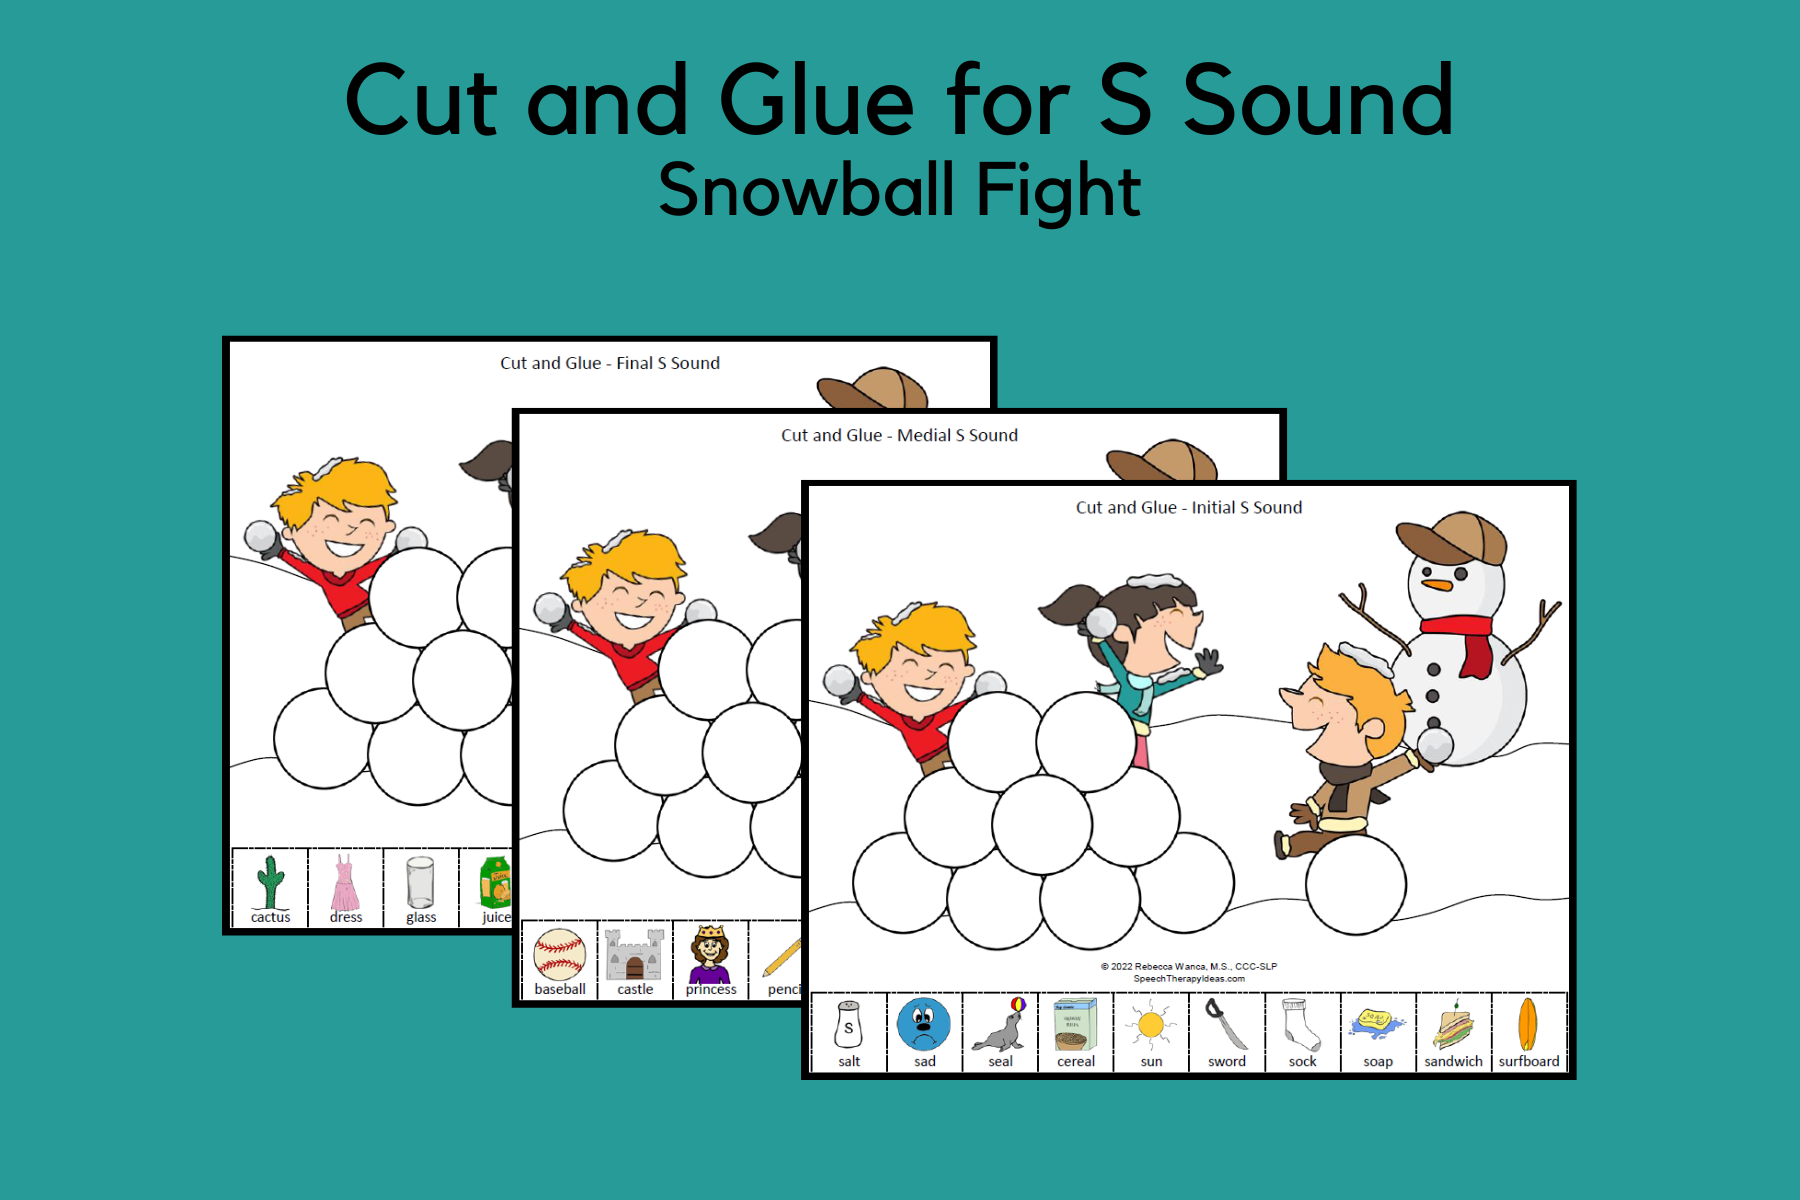 Cut and Glue for S Sound – Snowball Fight